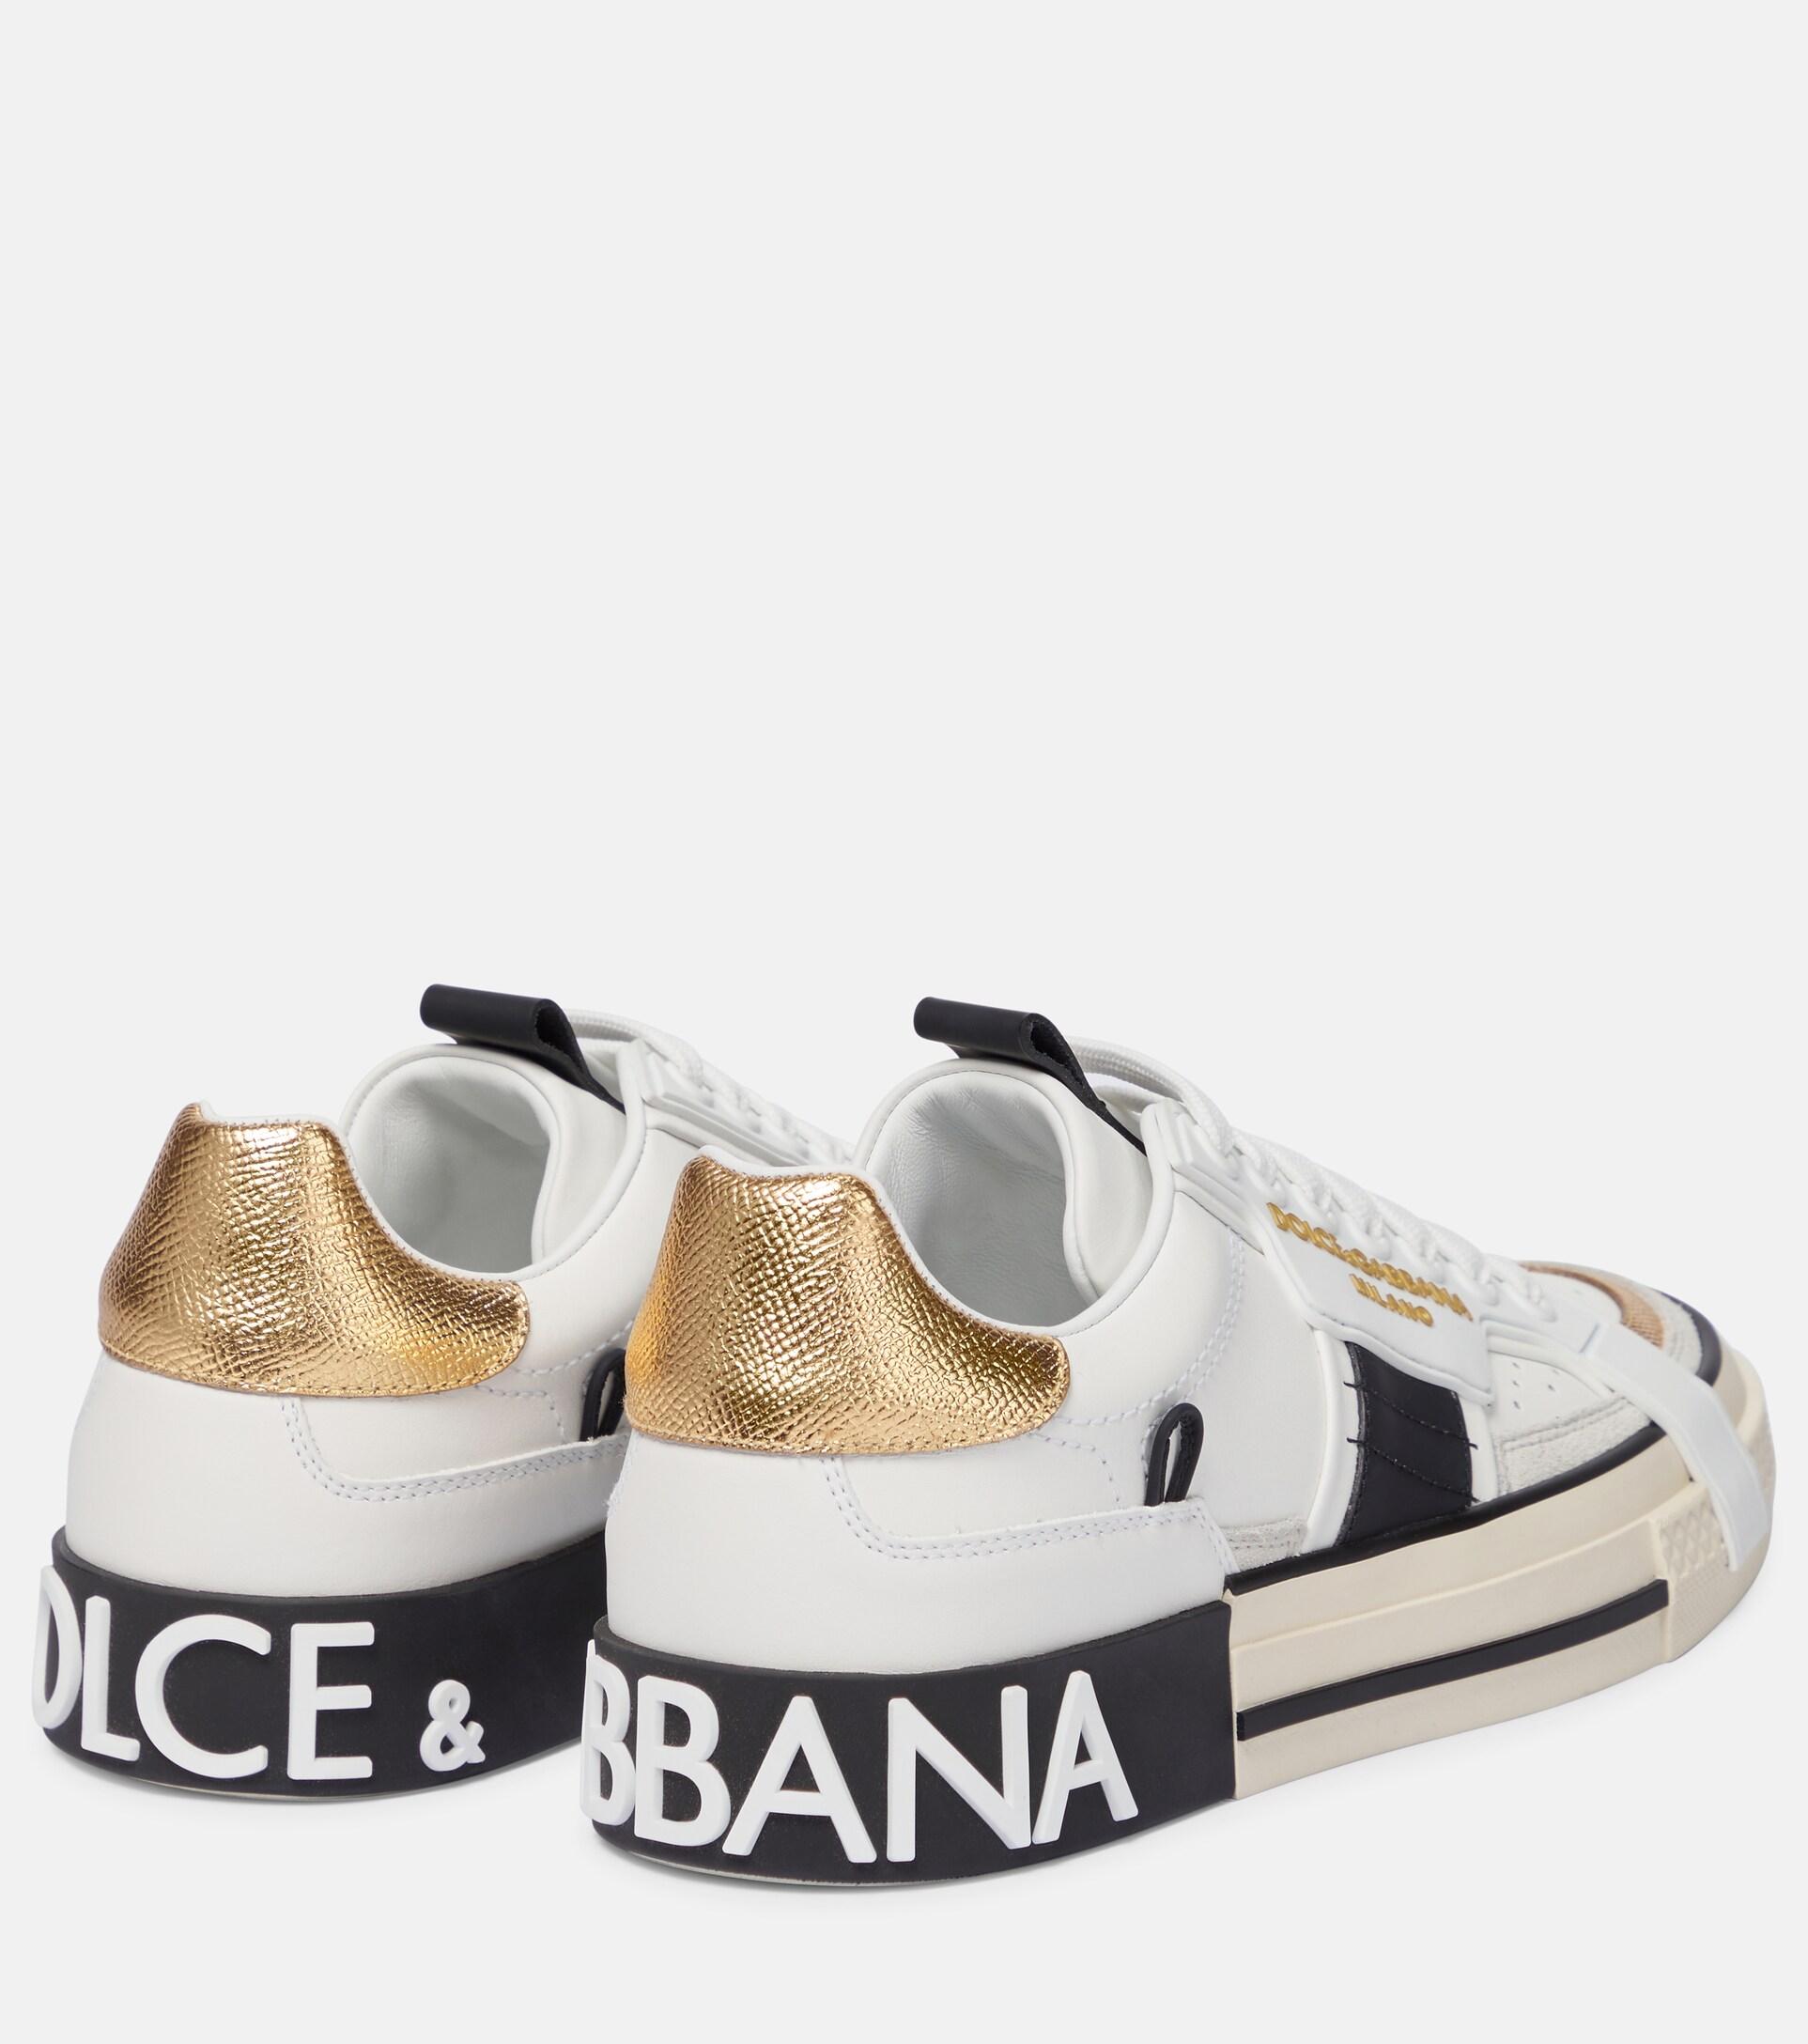 Dolce & Gabbana Custom 2.0 Leather Sneakers in White | Lyst